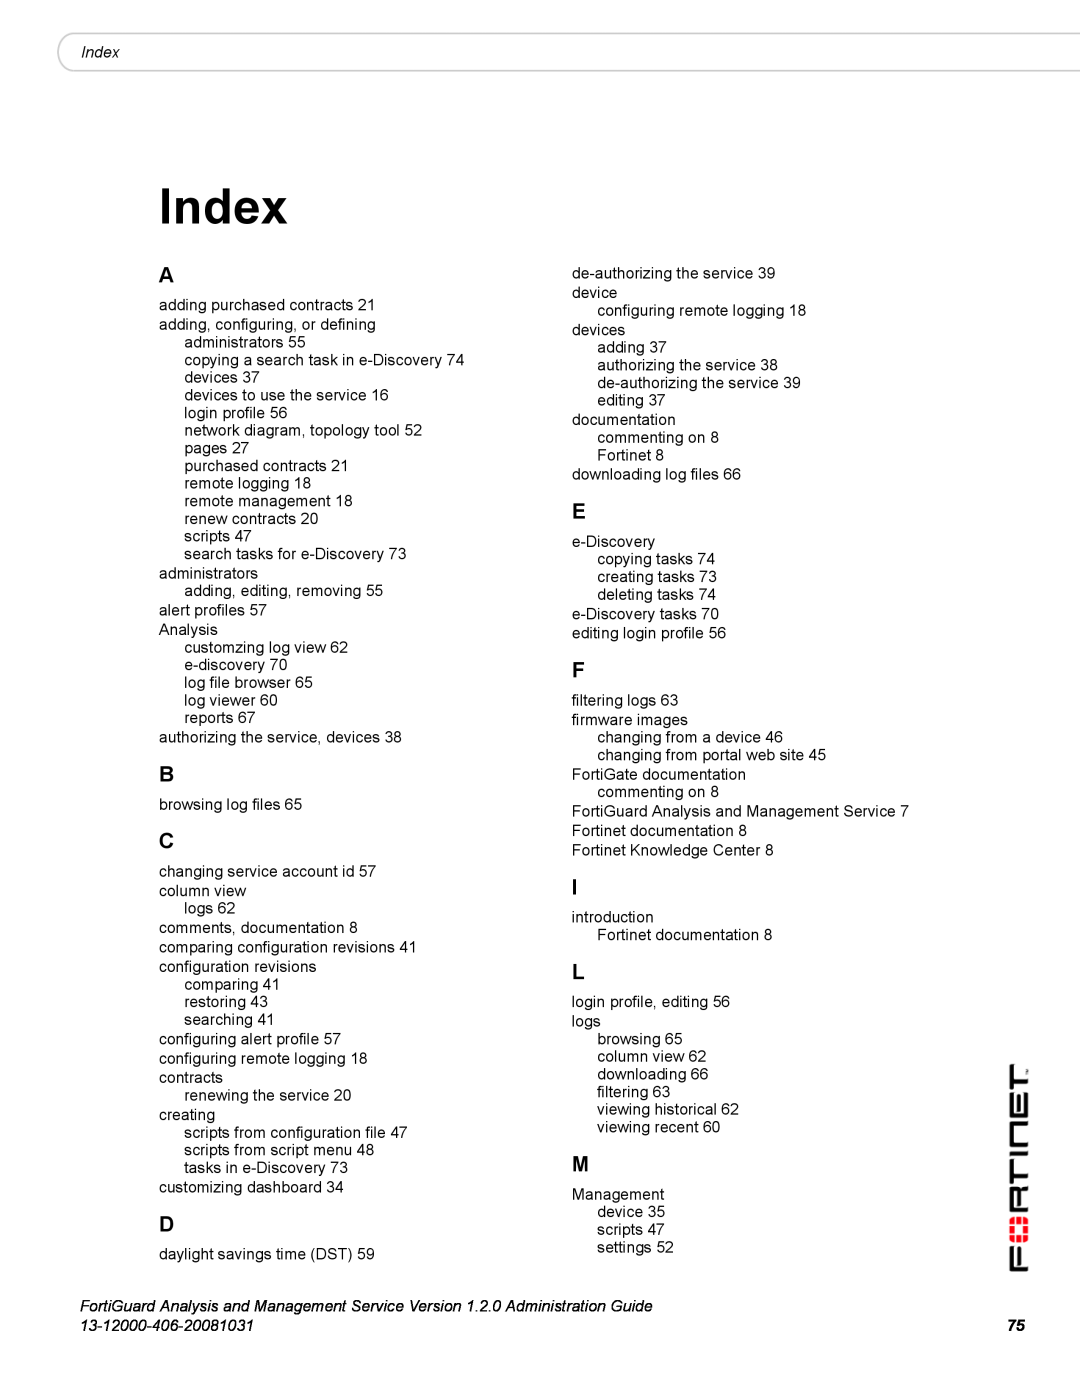 Fortinet 1.2.0 manual Index 